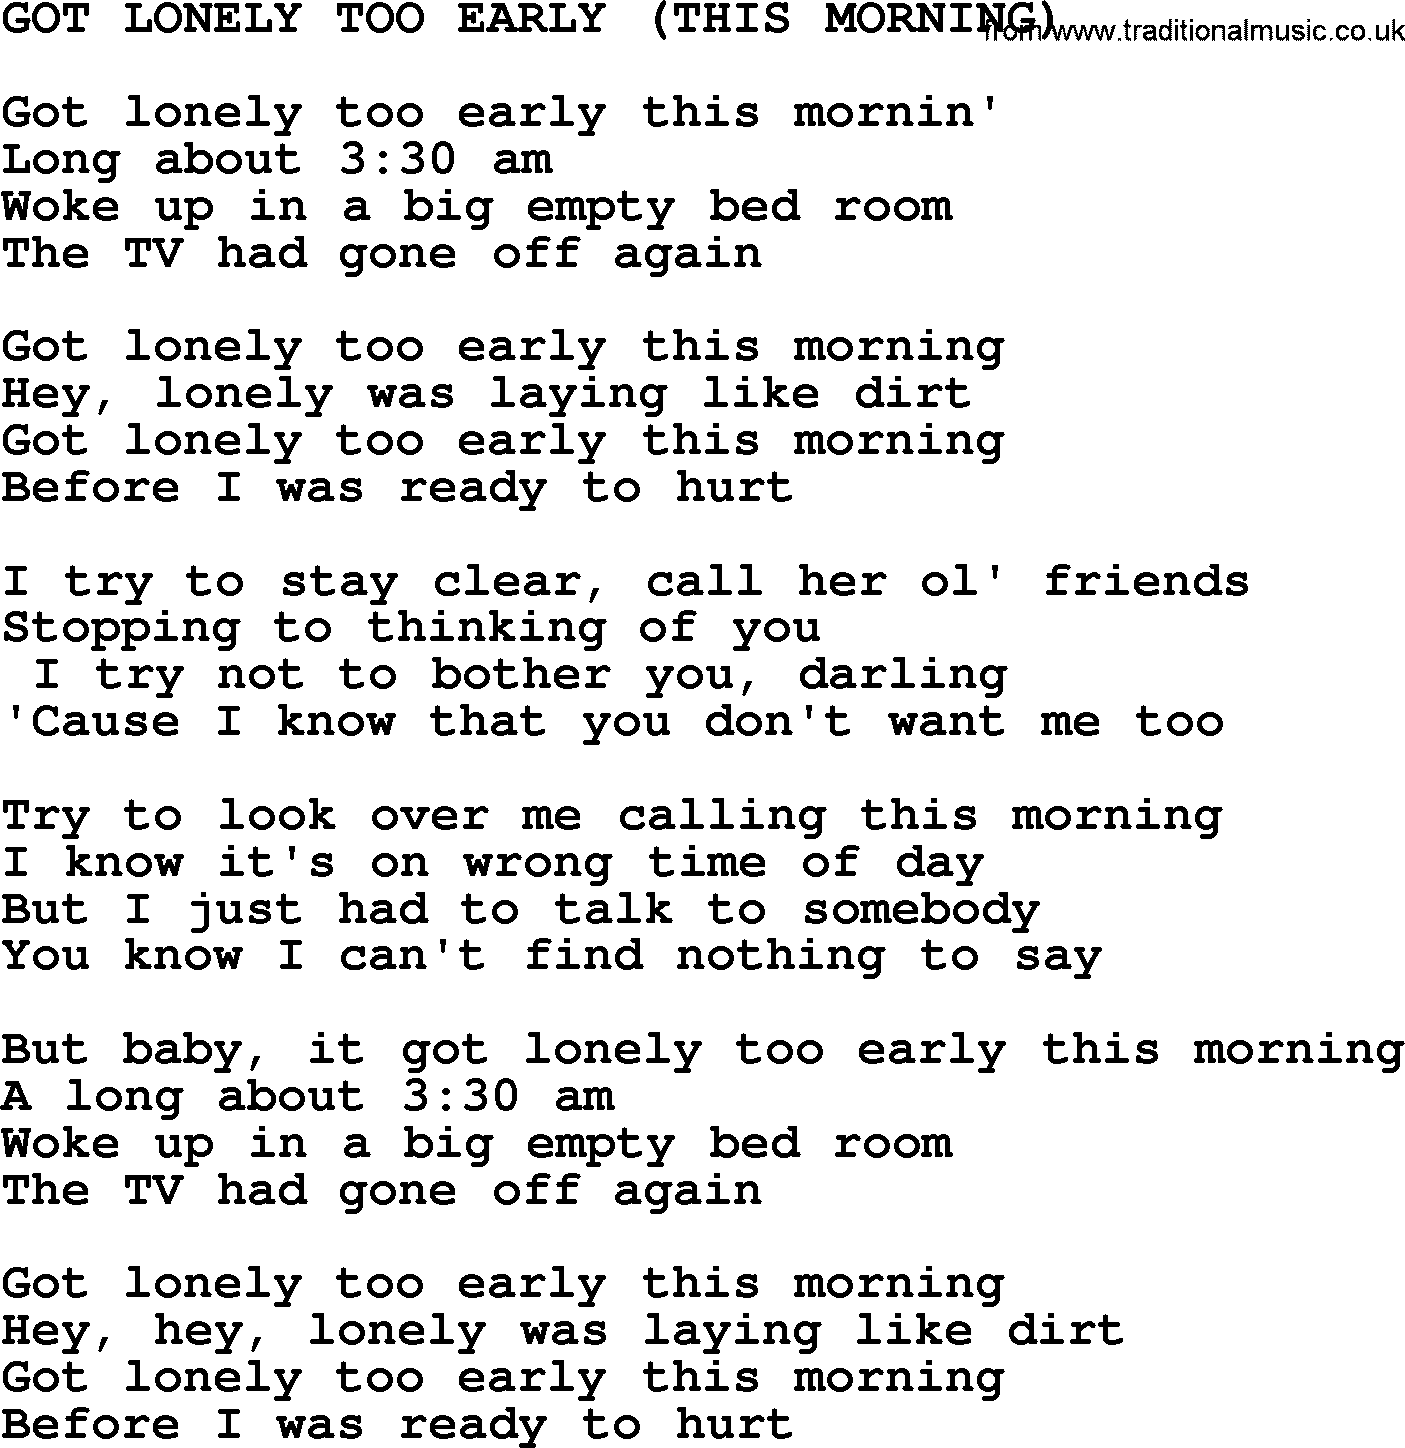 Merle Haggard song: Got Lonely Too Early This Morning1, lyrics.